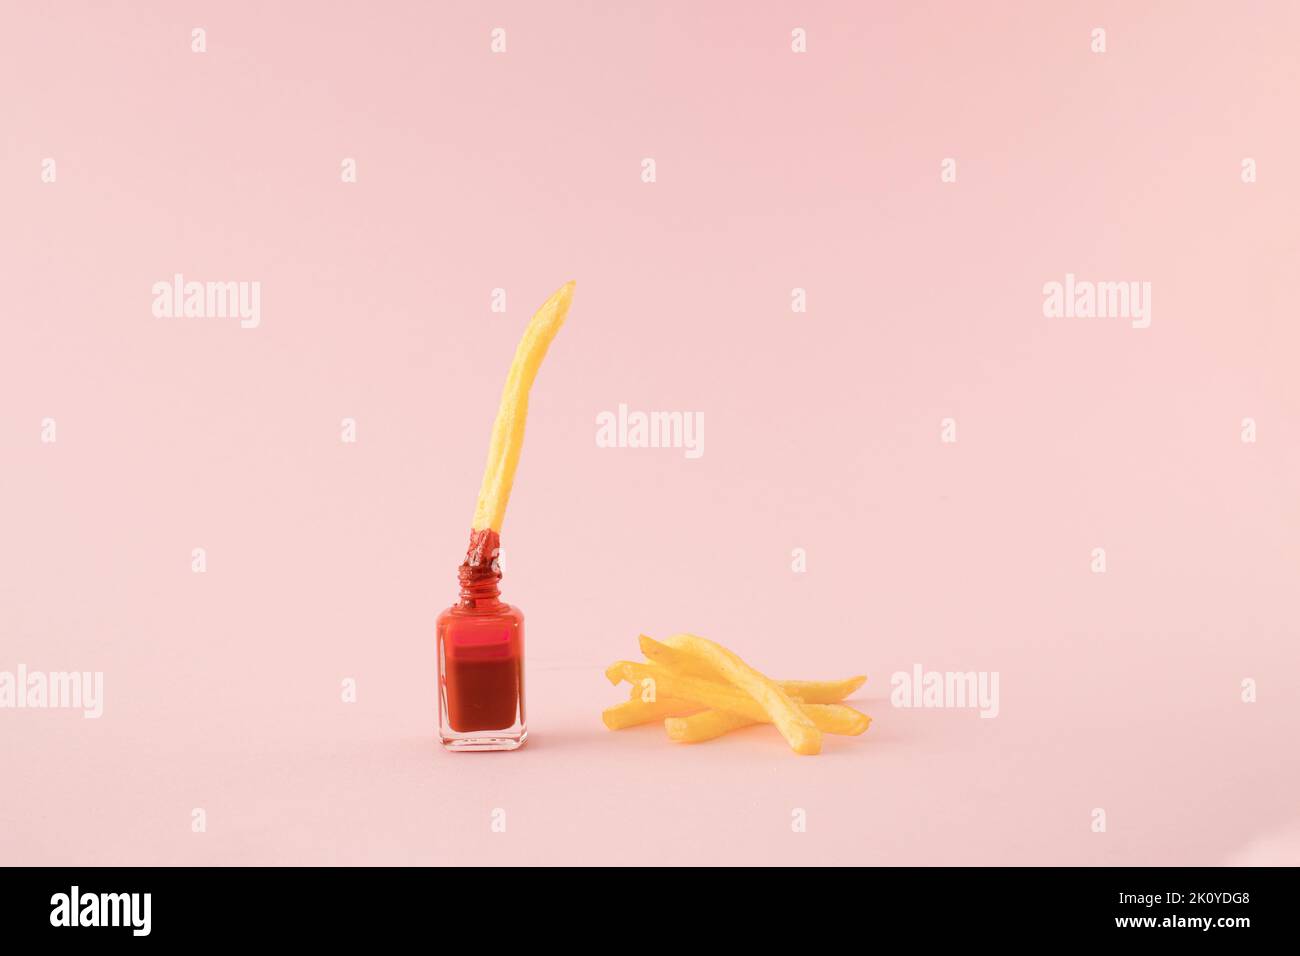 French fried potato dipped in red nail polish with a pile of fries on the side on pink background. Minimal concept. Stock Photo